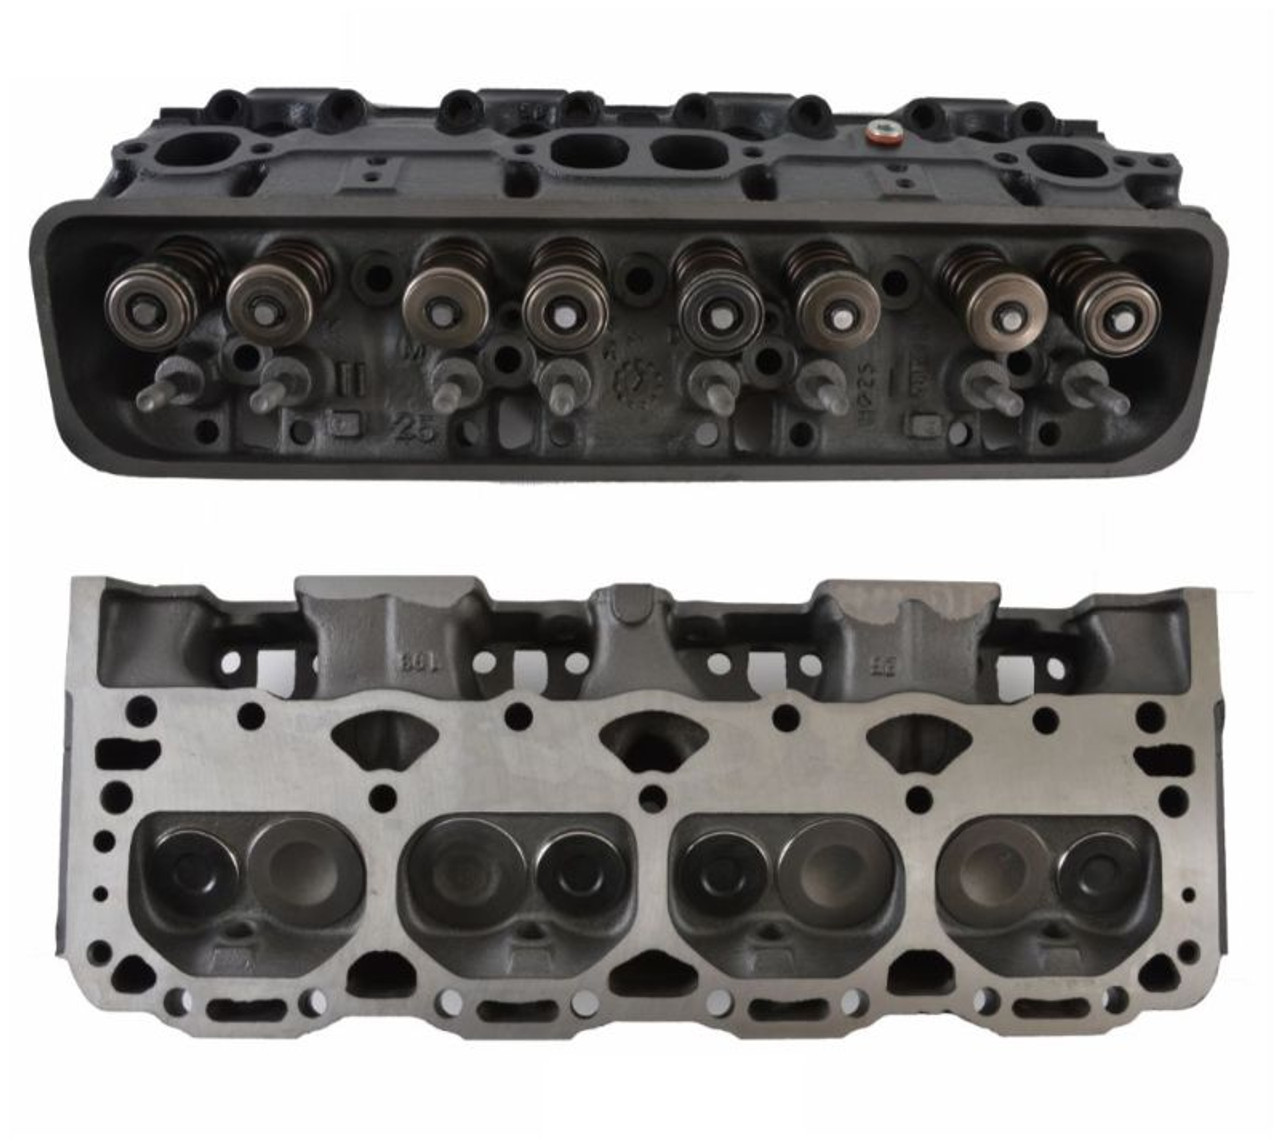 1989 Chevrolet C3500 5.7L Engine Cylinder Head Assembly CH1065R -75